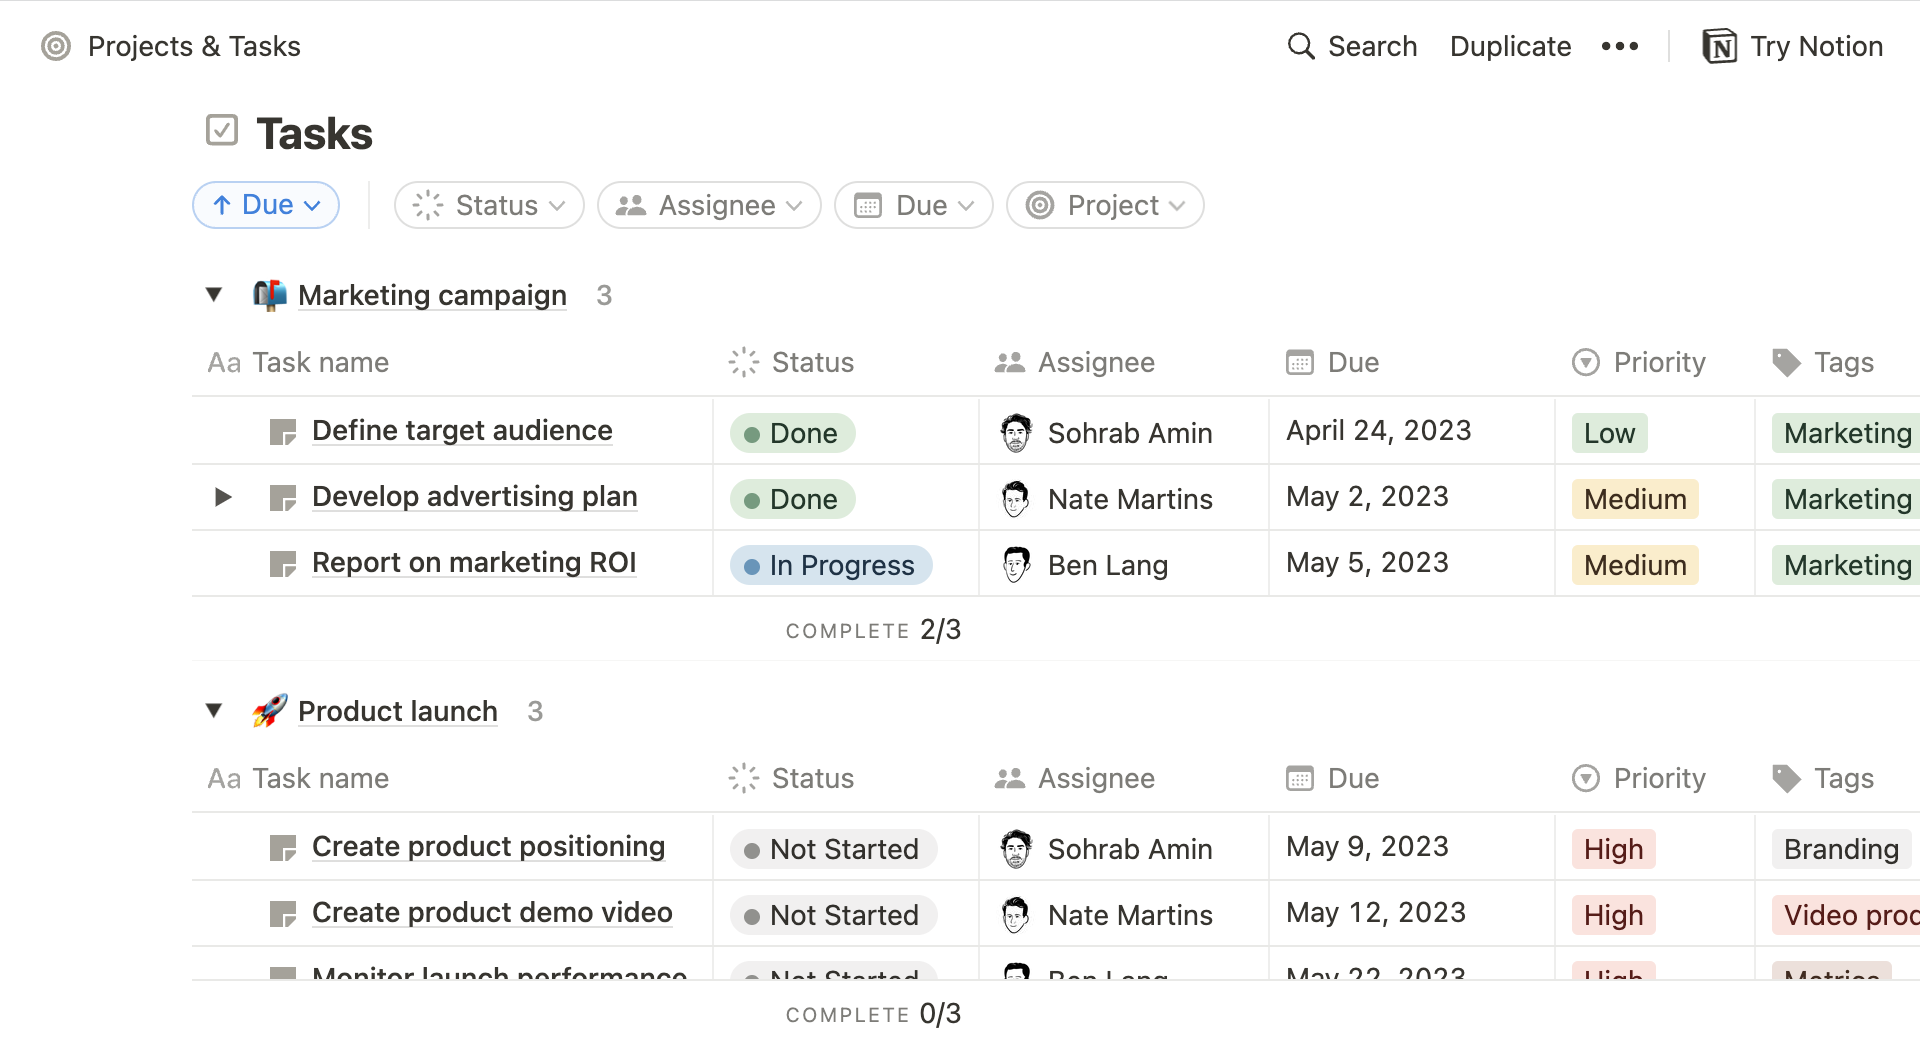 The Projects & Tasks template that you can add to your Notion workspace.